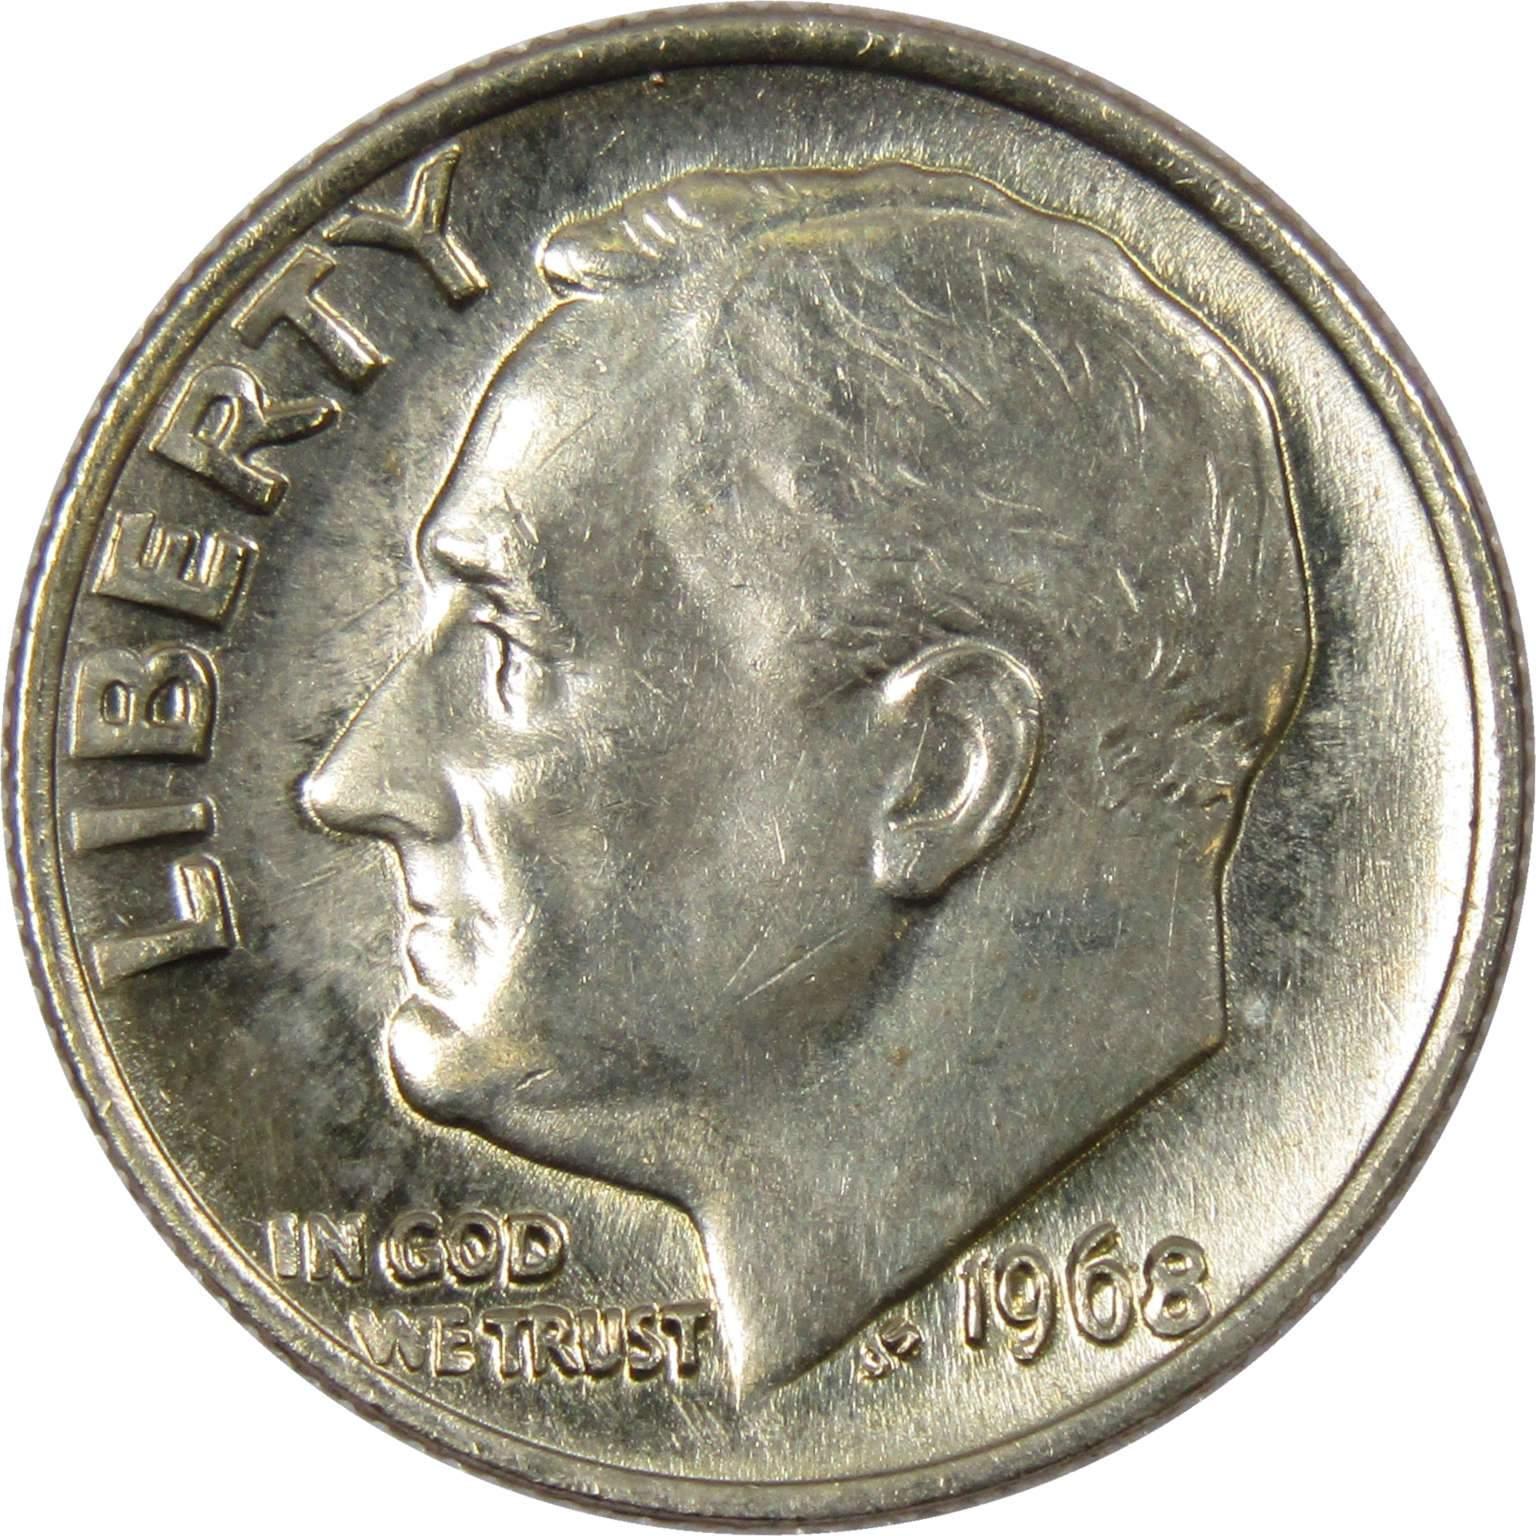 1968 Roosevelt Dime BU Uncirculated Mint State 10c US Coin Collectible